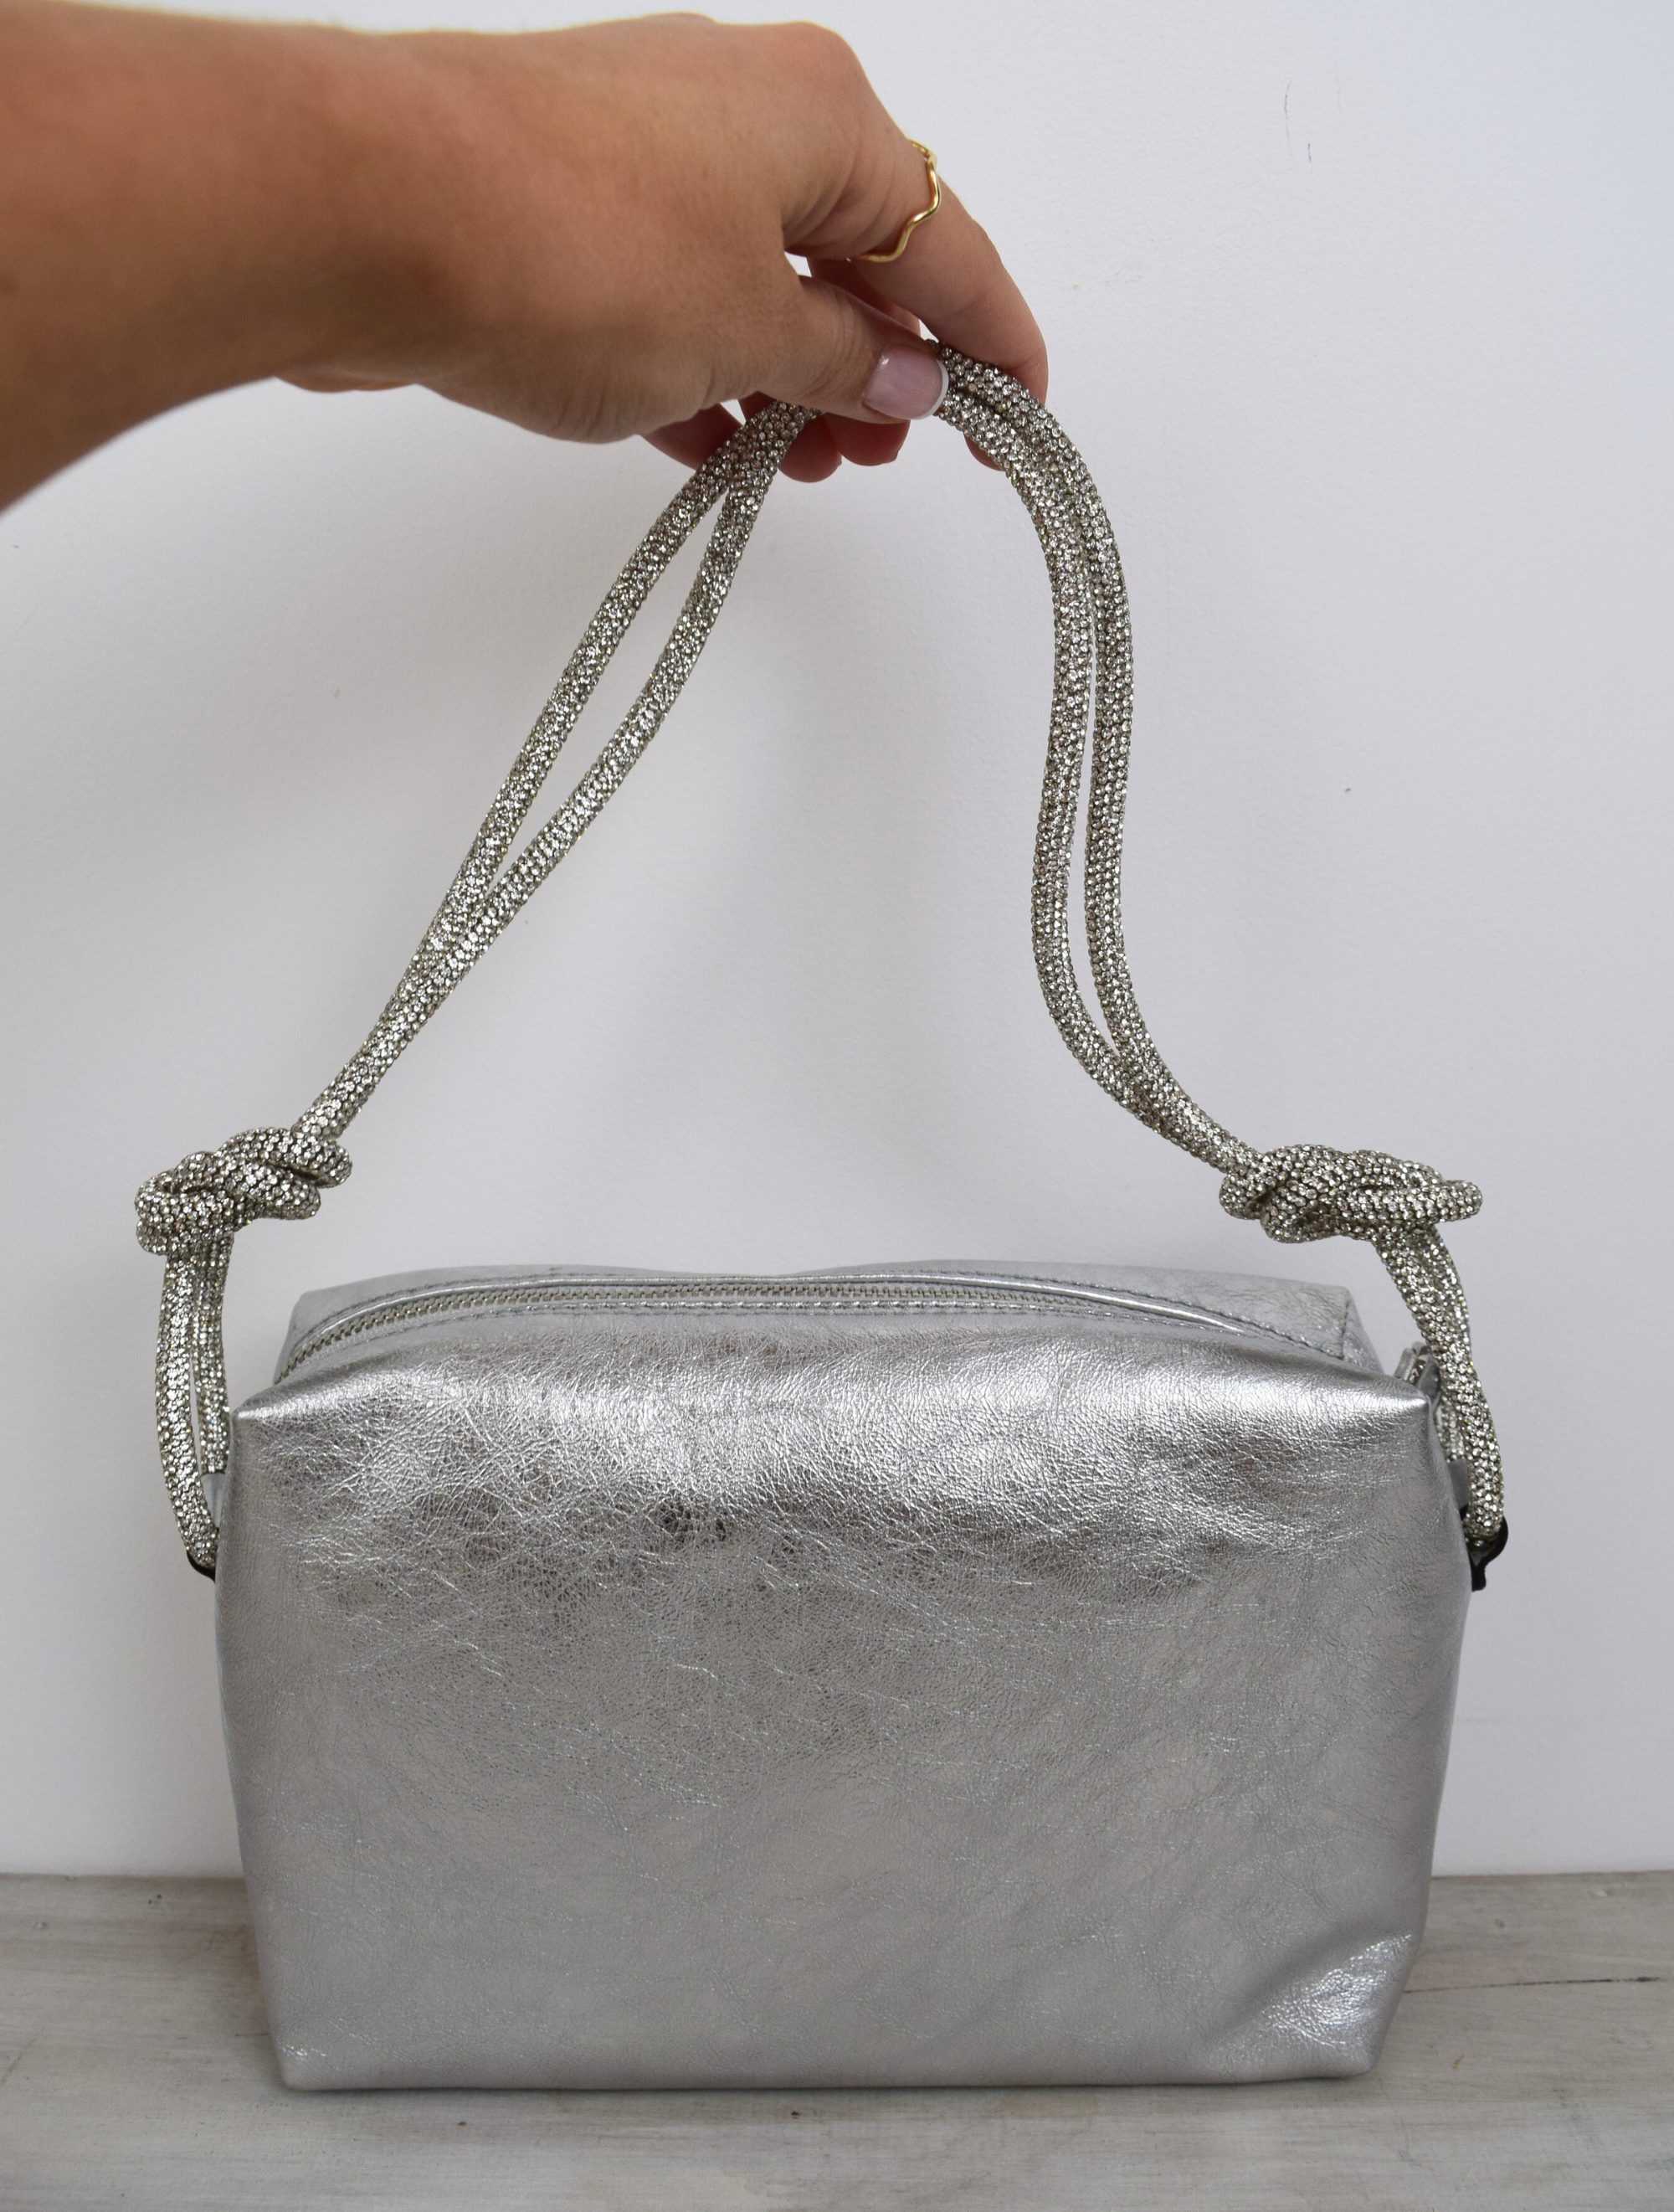 Silver leather bag with knotted sparkly shoulder strap